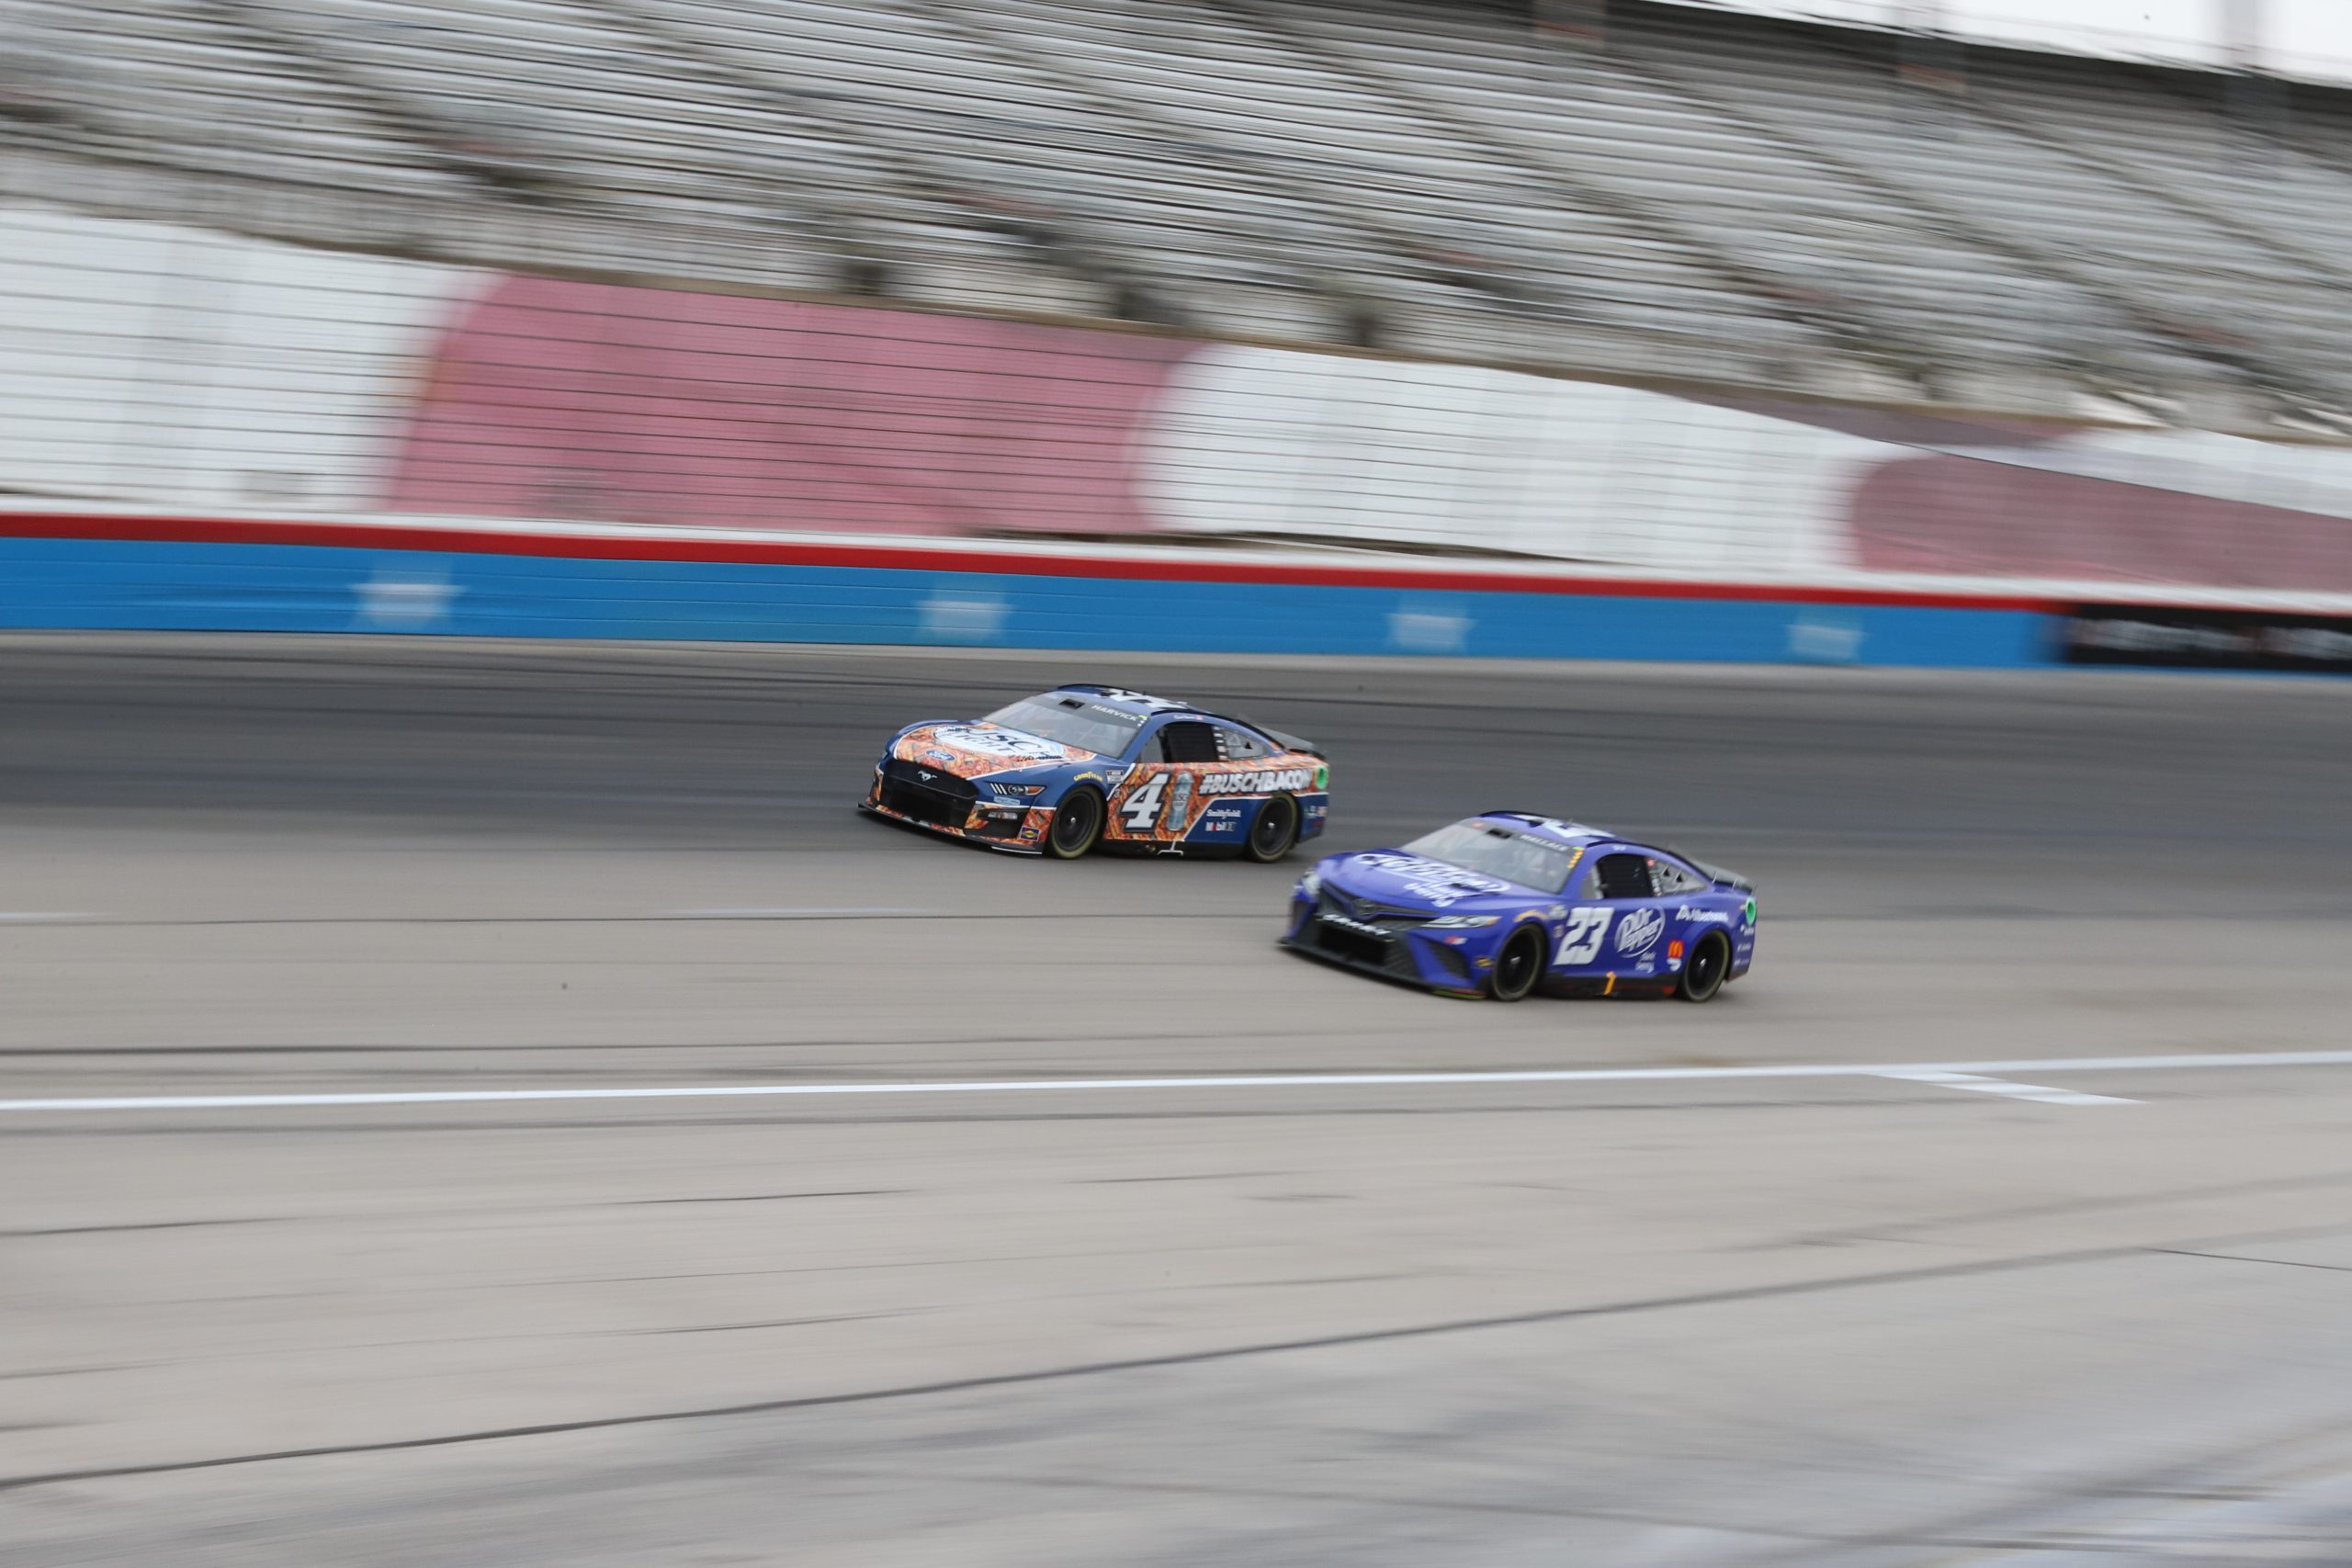 Might we see some side-by-side racing tonight at Texas? (Photo: Dylan Nadwodny | The Podium Finish)